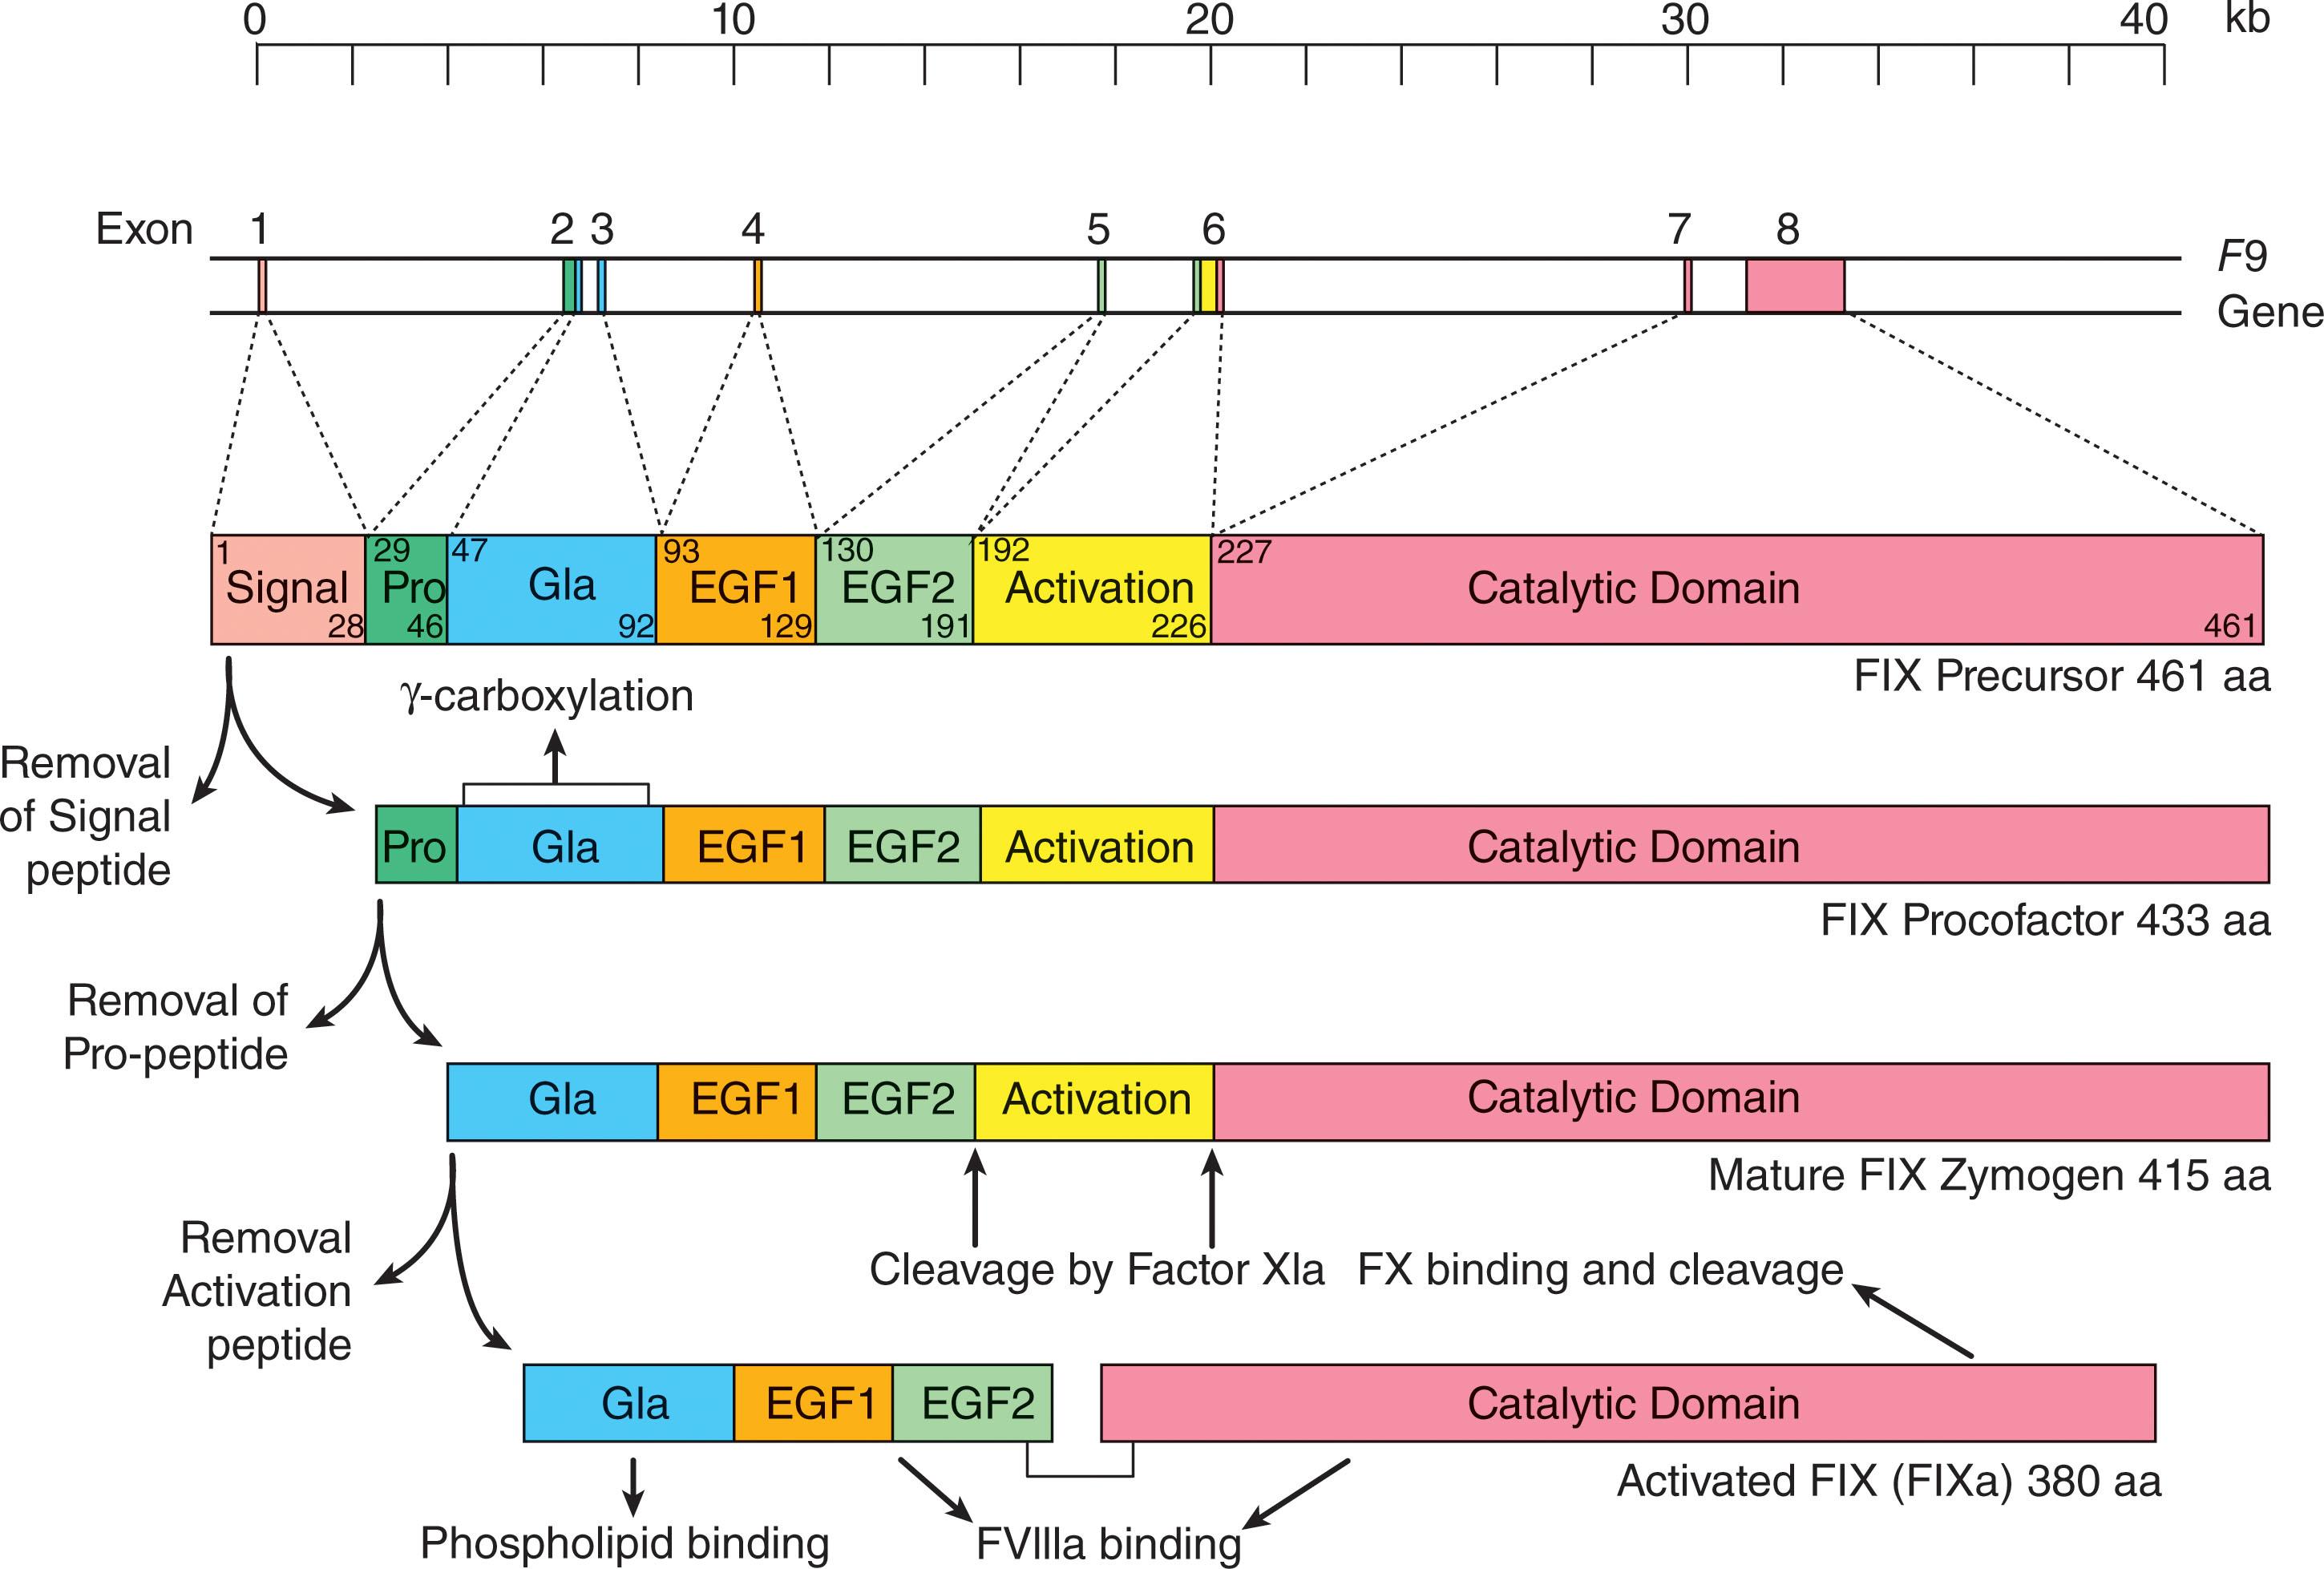 Figure 134.5, DERIVATION OF ACTIVATED FIX FROM THE F9 GENE.